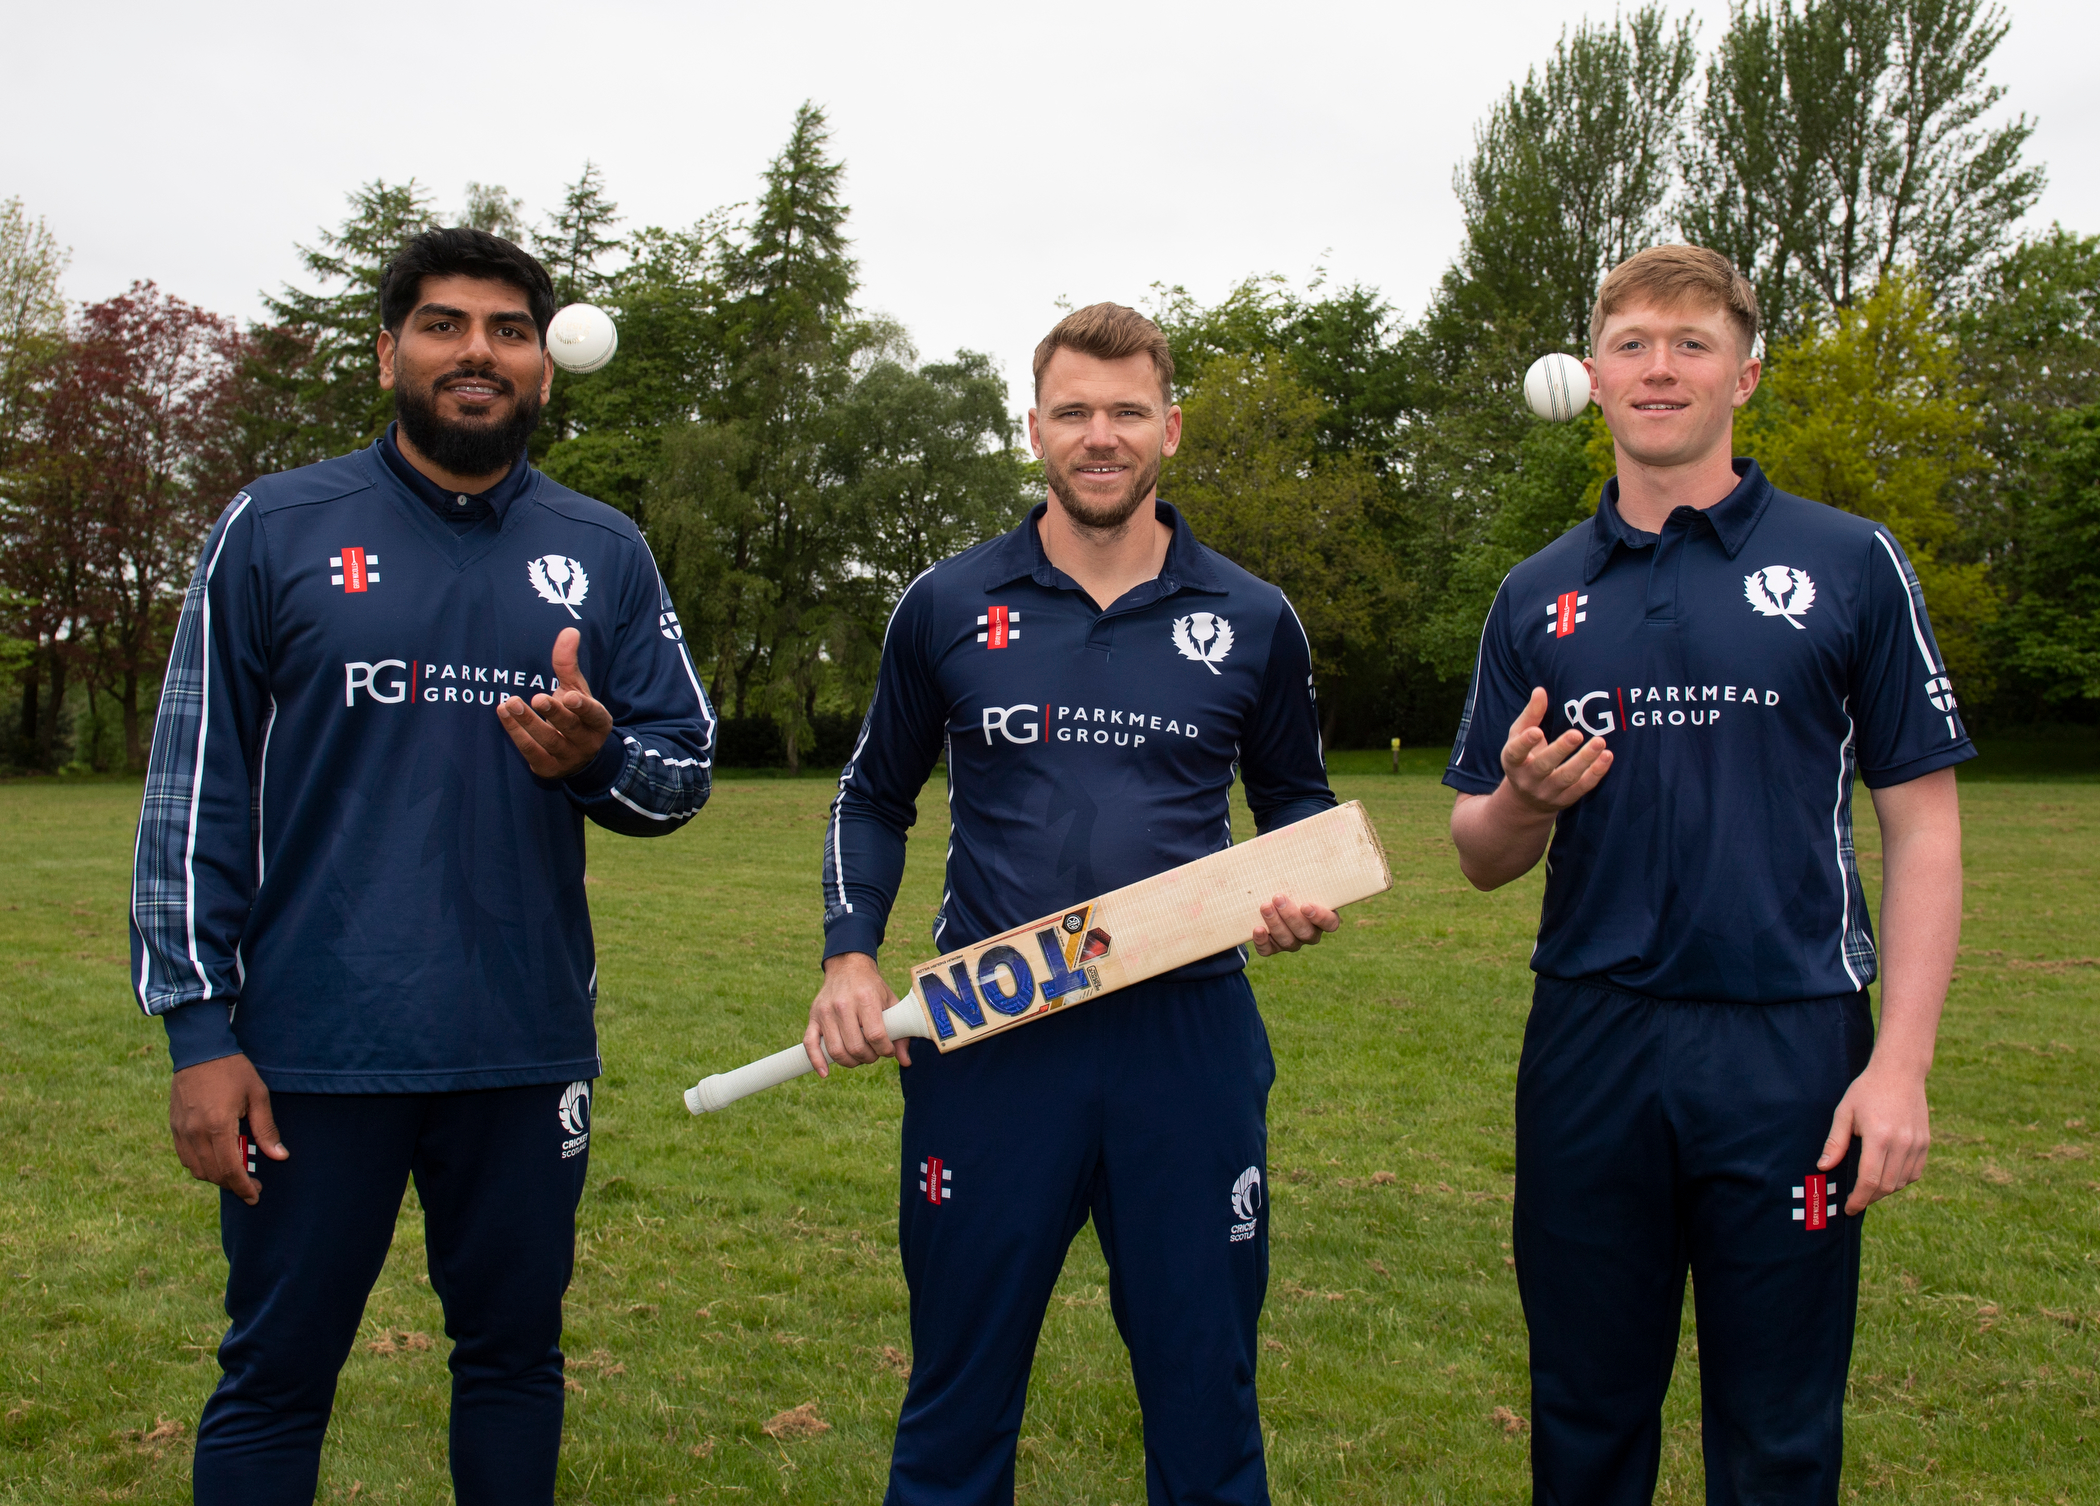 SCOTLAND TO FACE SRI LANKA & IRELAND IN ICC MEN’S WORLD CUP QUALIFER GROUP STAGE